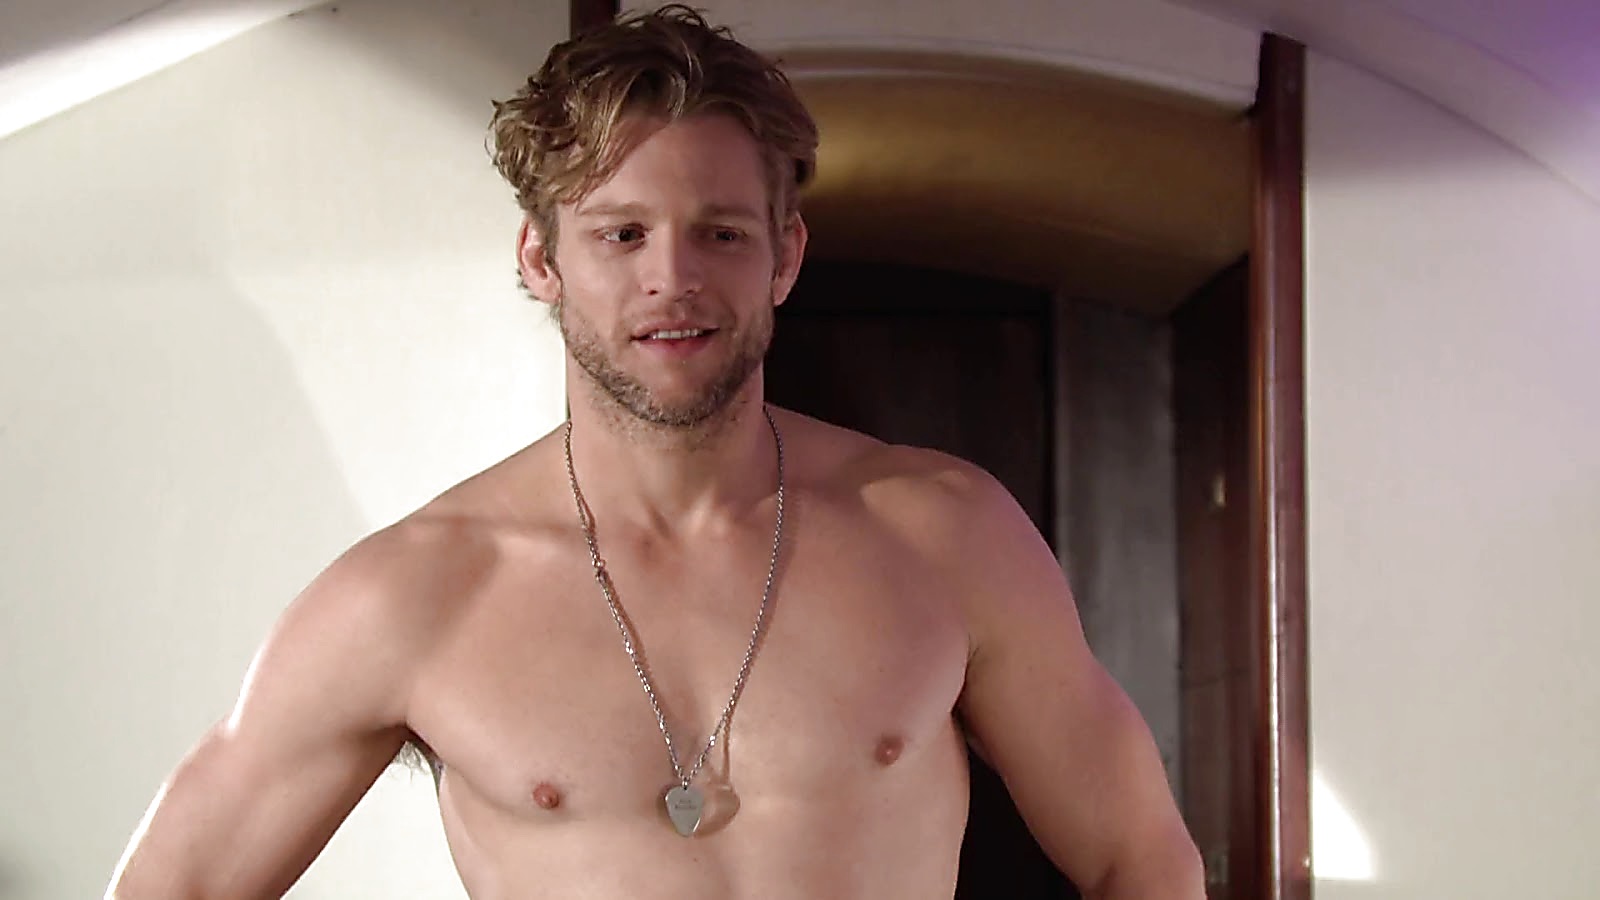 Chase Coleman sexy shirtless scene April 4, 2020, 12pm